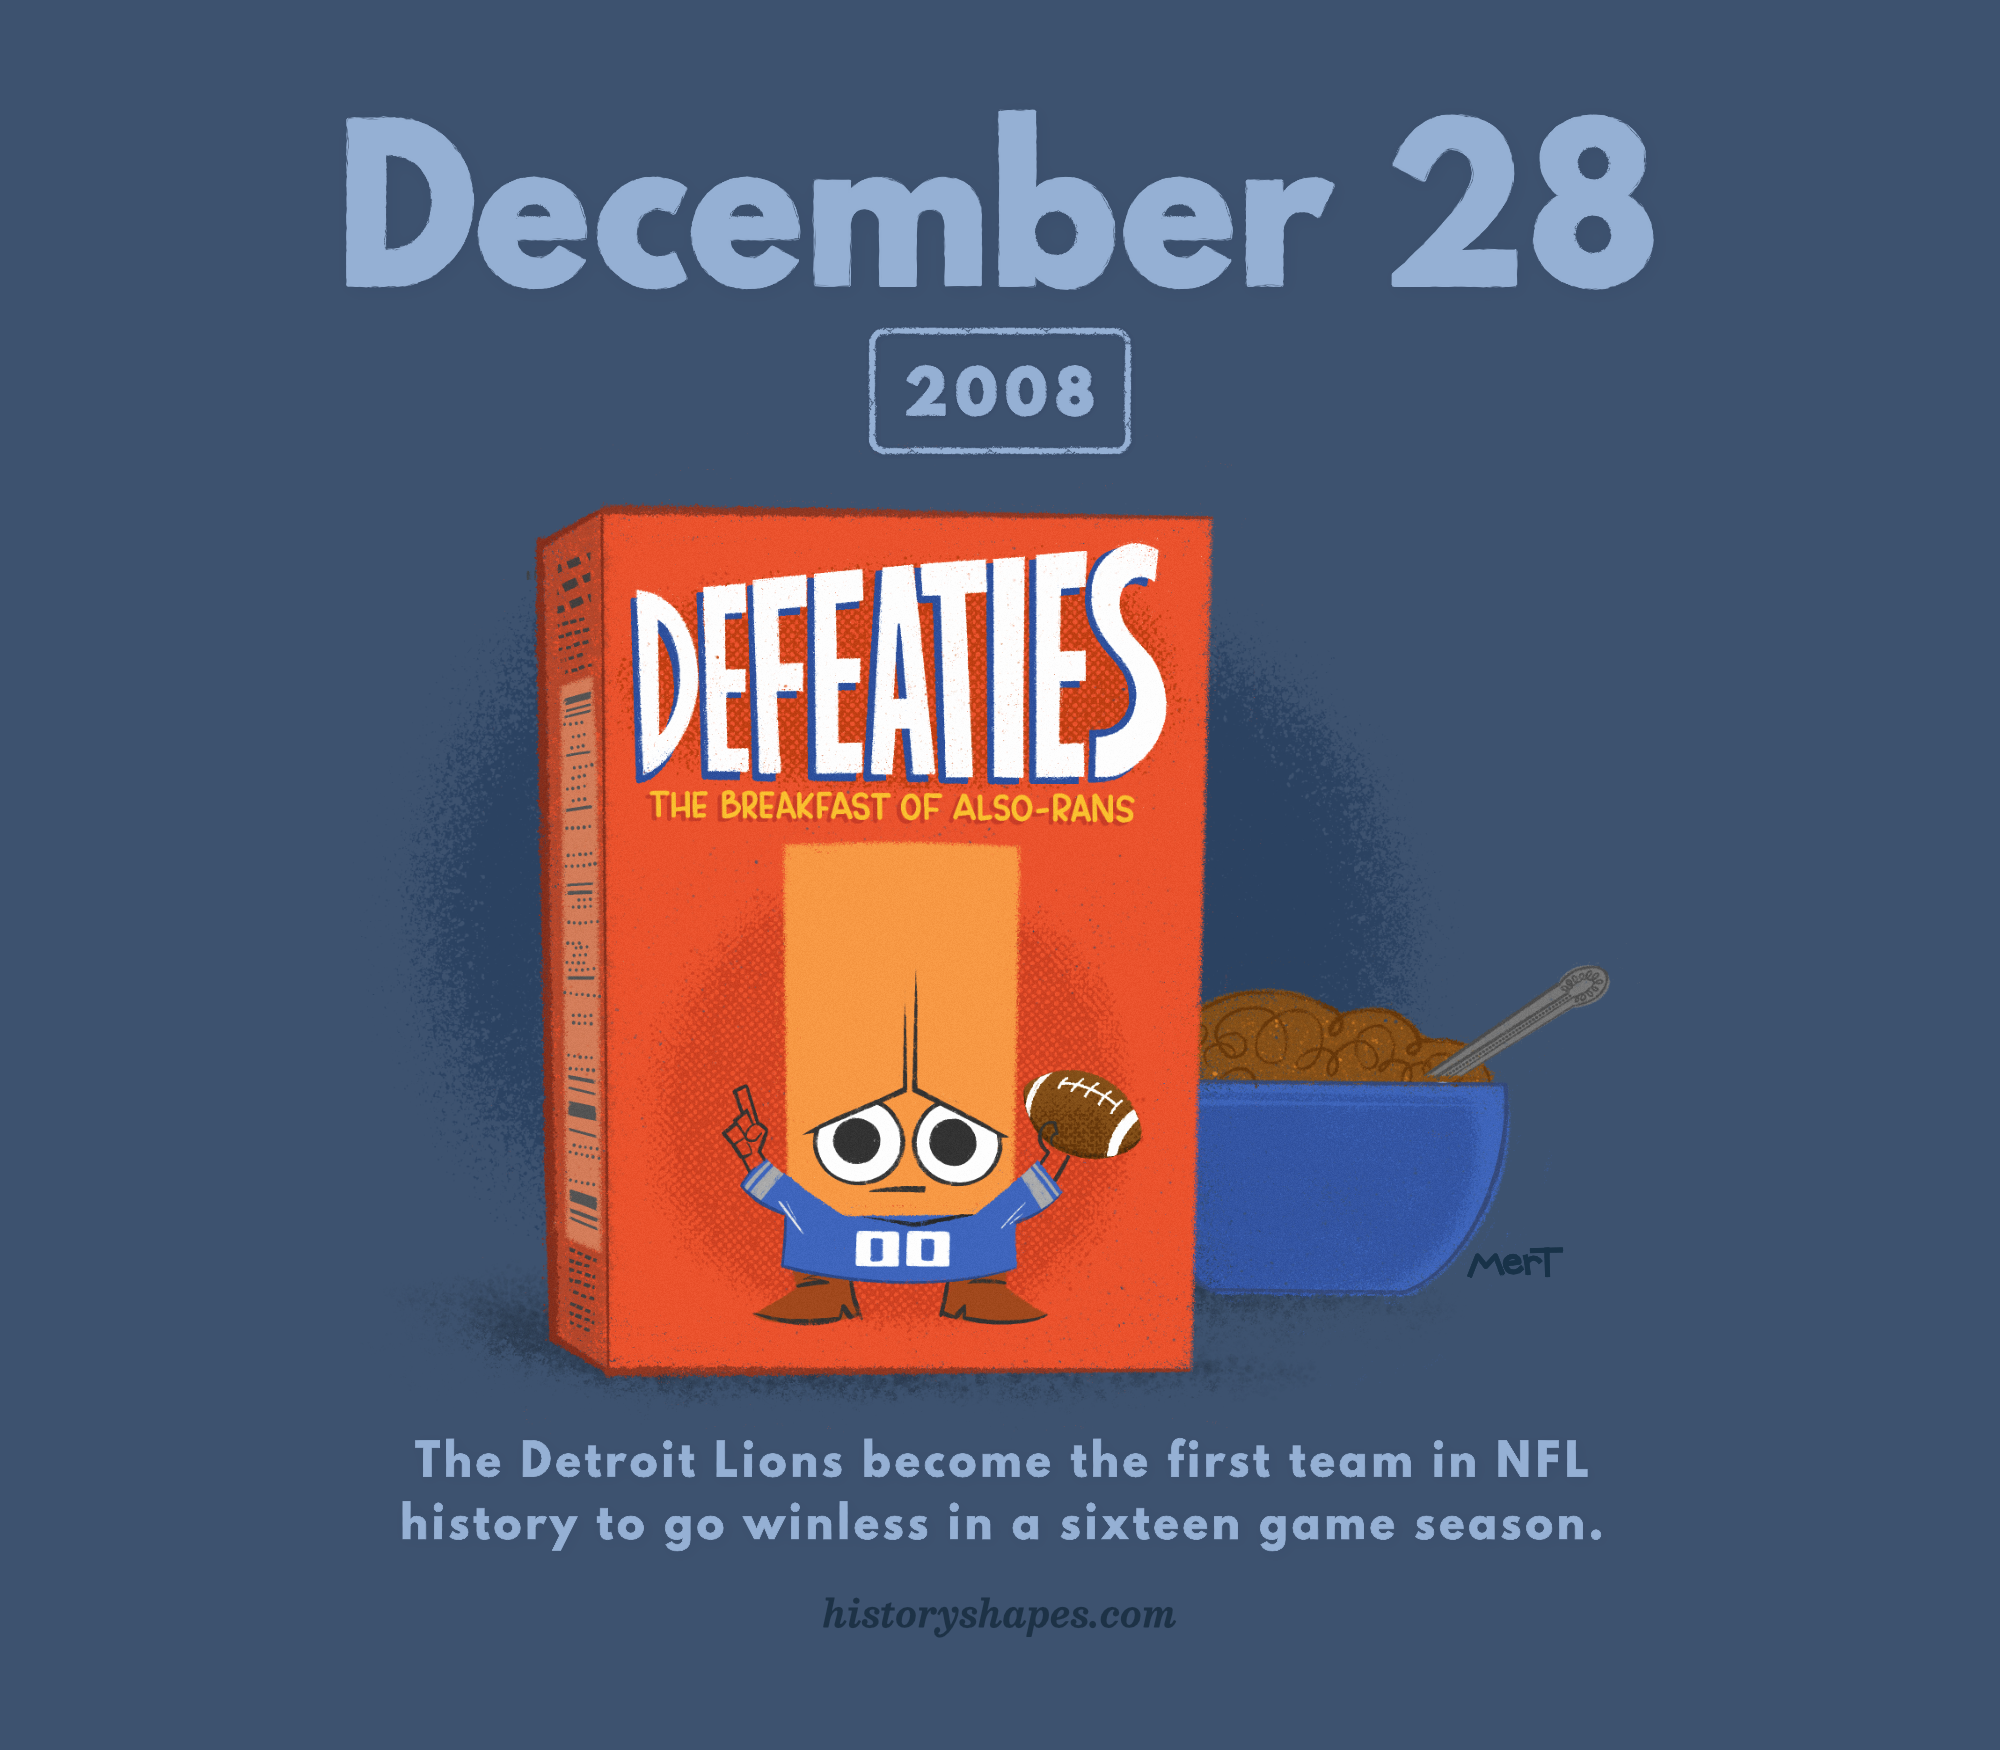 Robbie, a sad orange rectangle, is dressed like a Detroit Lions player on a box of "Defeaties: The Breakfast of Also-Rans."